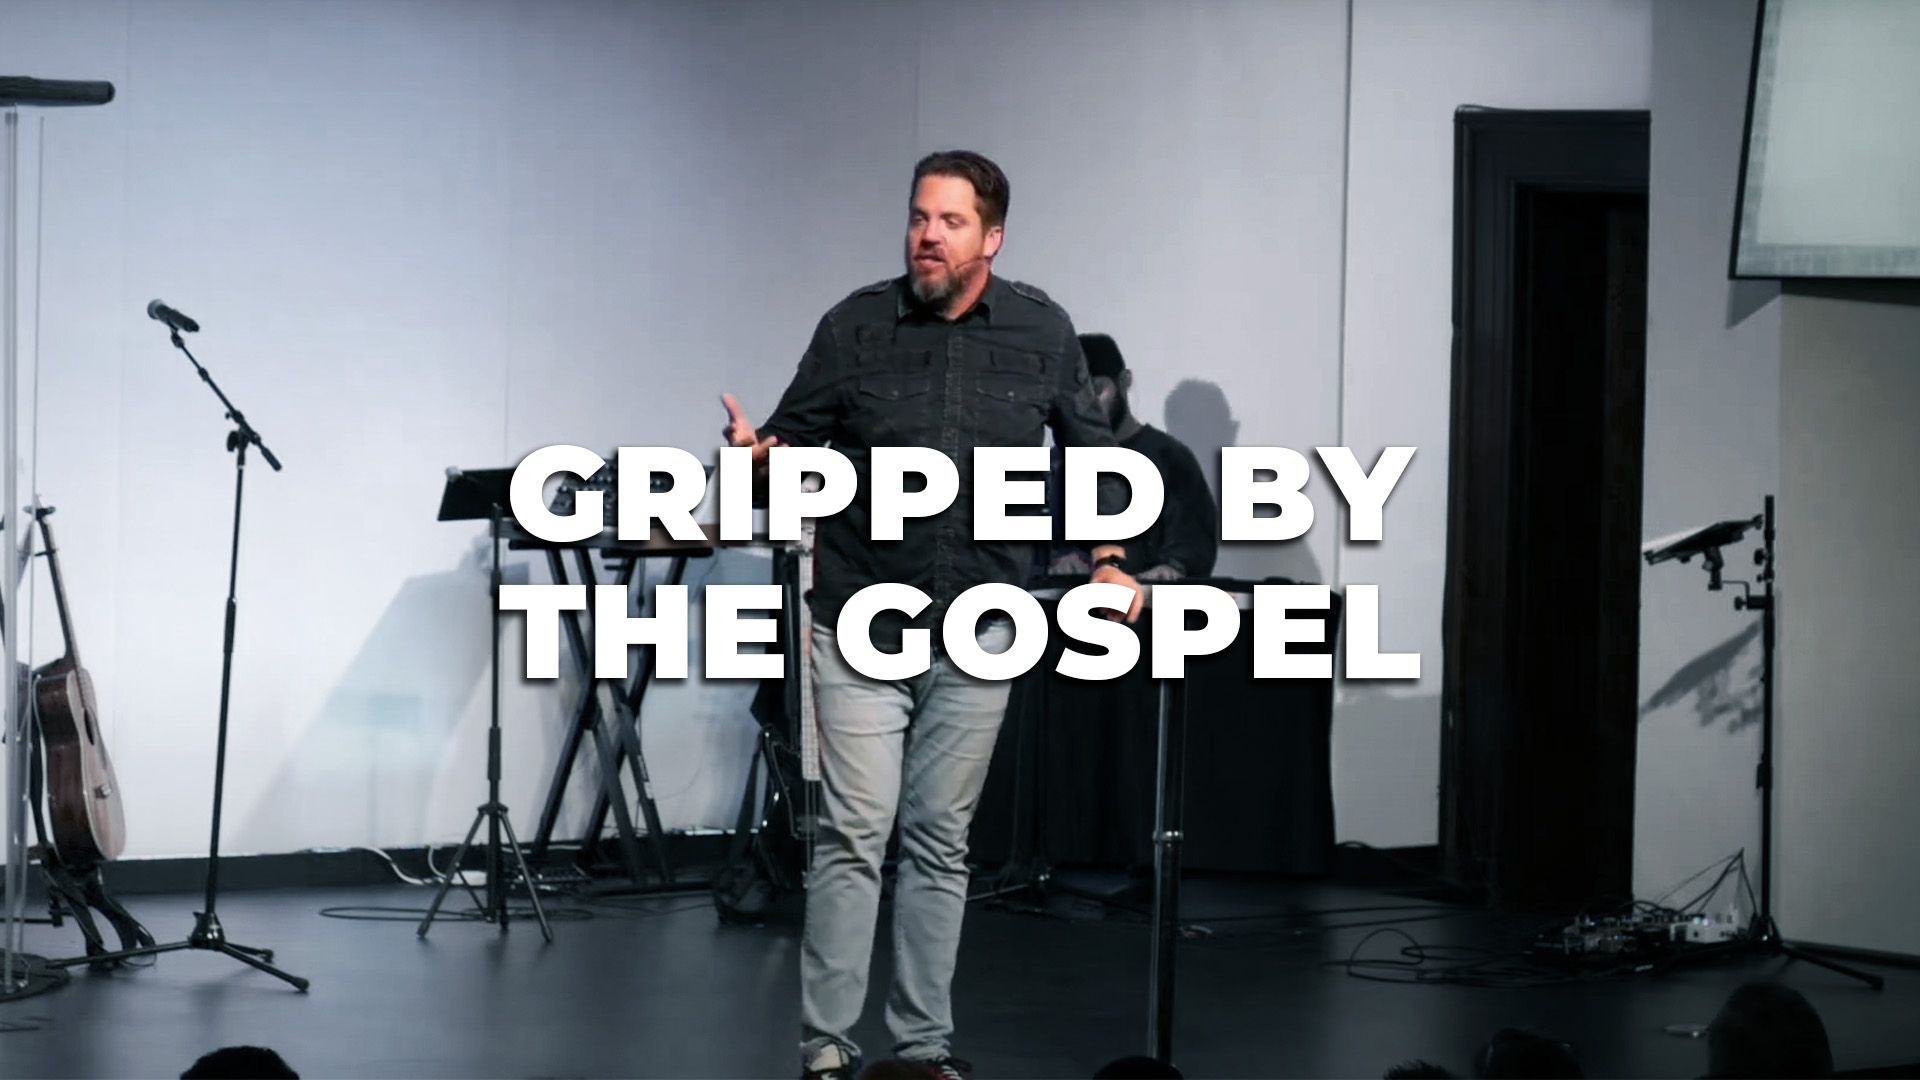 Gripped by the Gospel